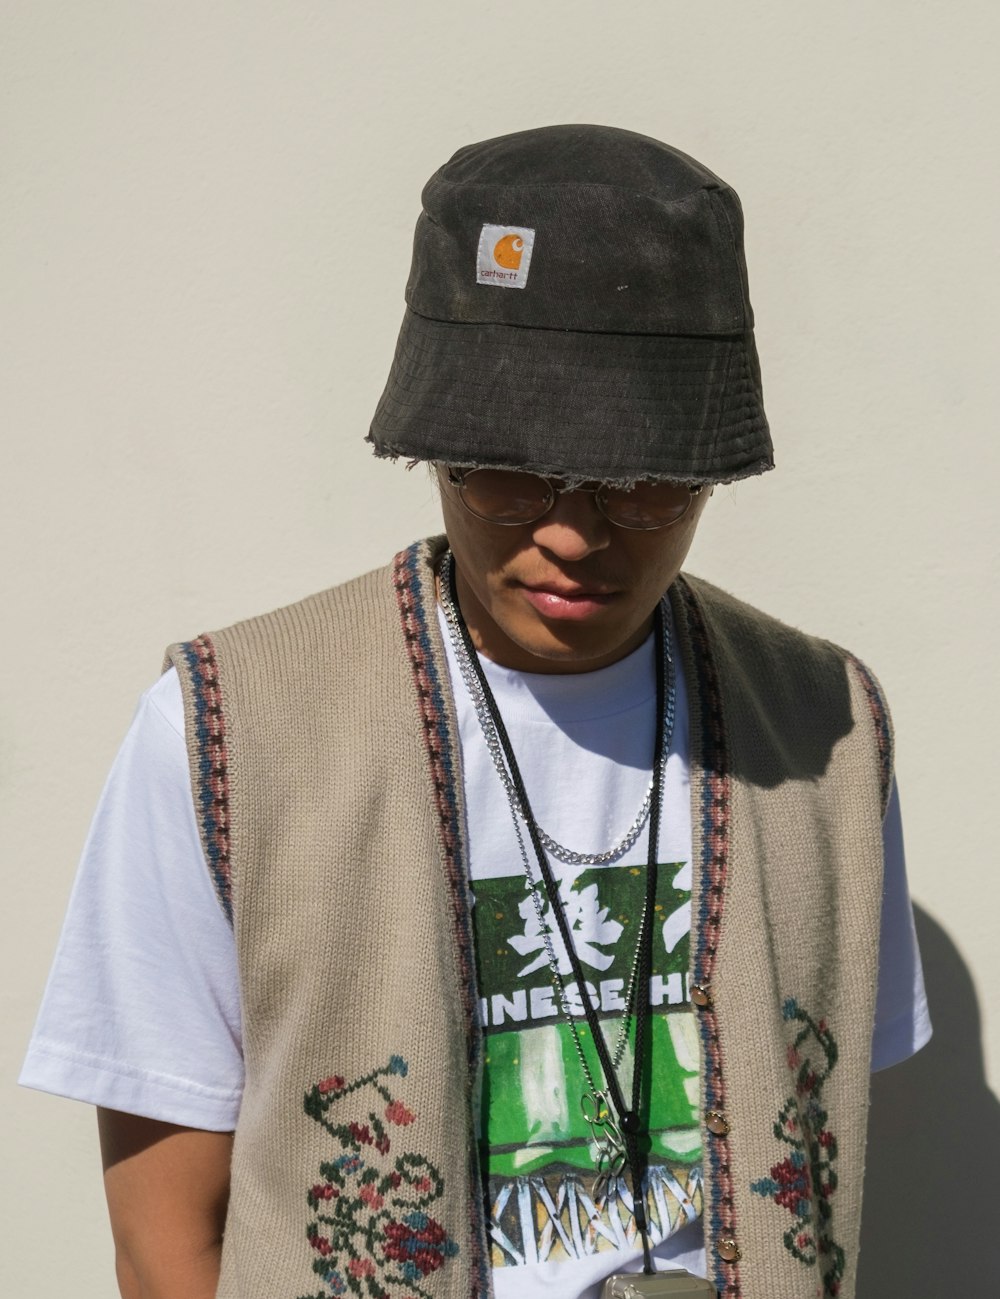 a young man wearing a hat and vest